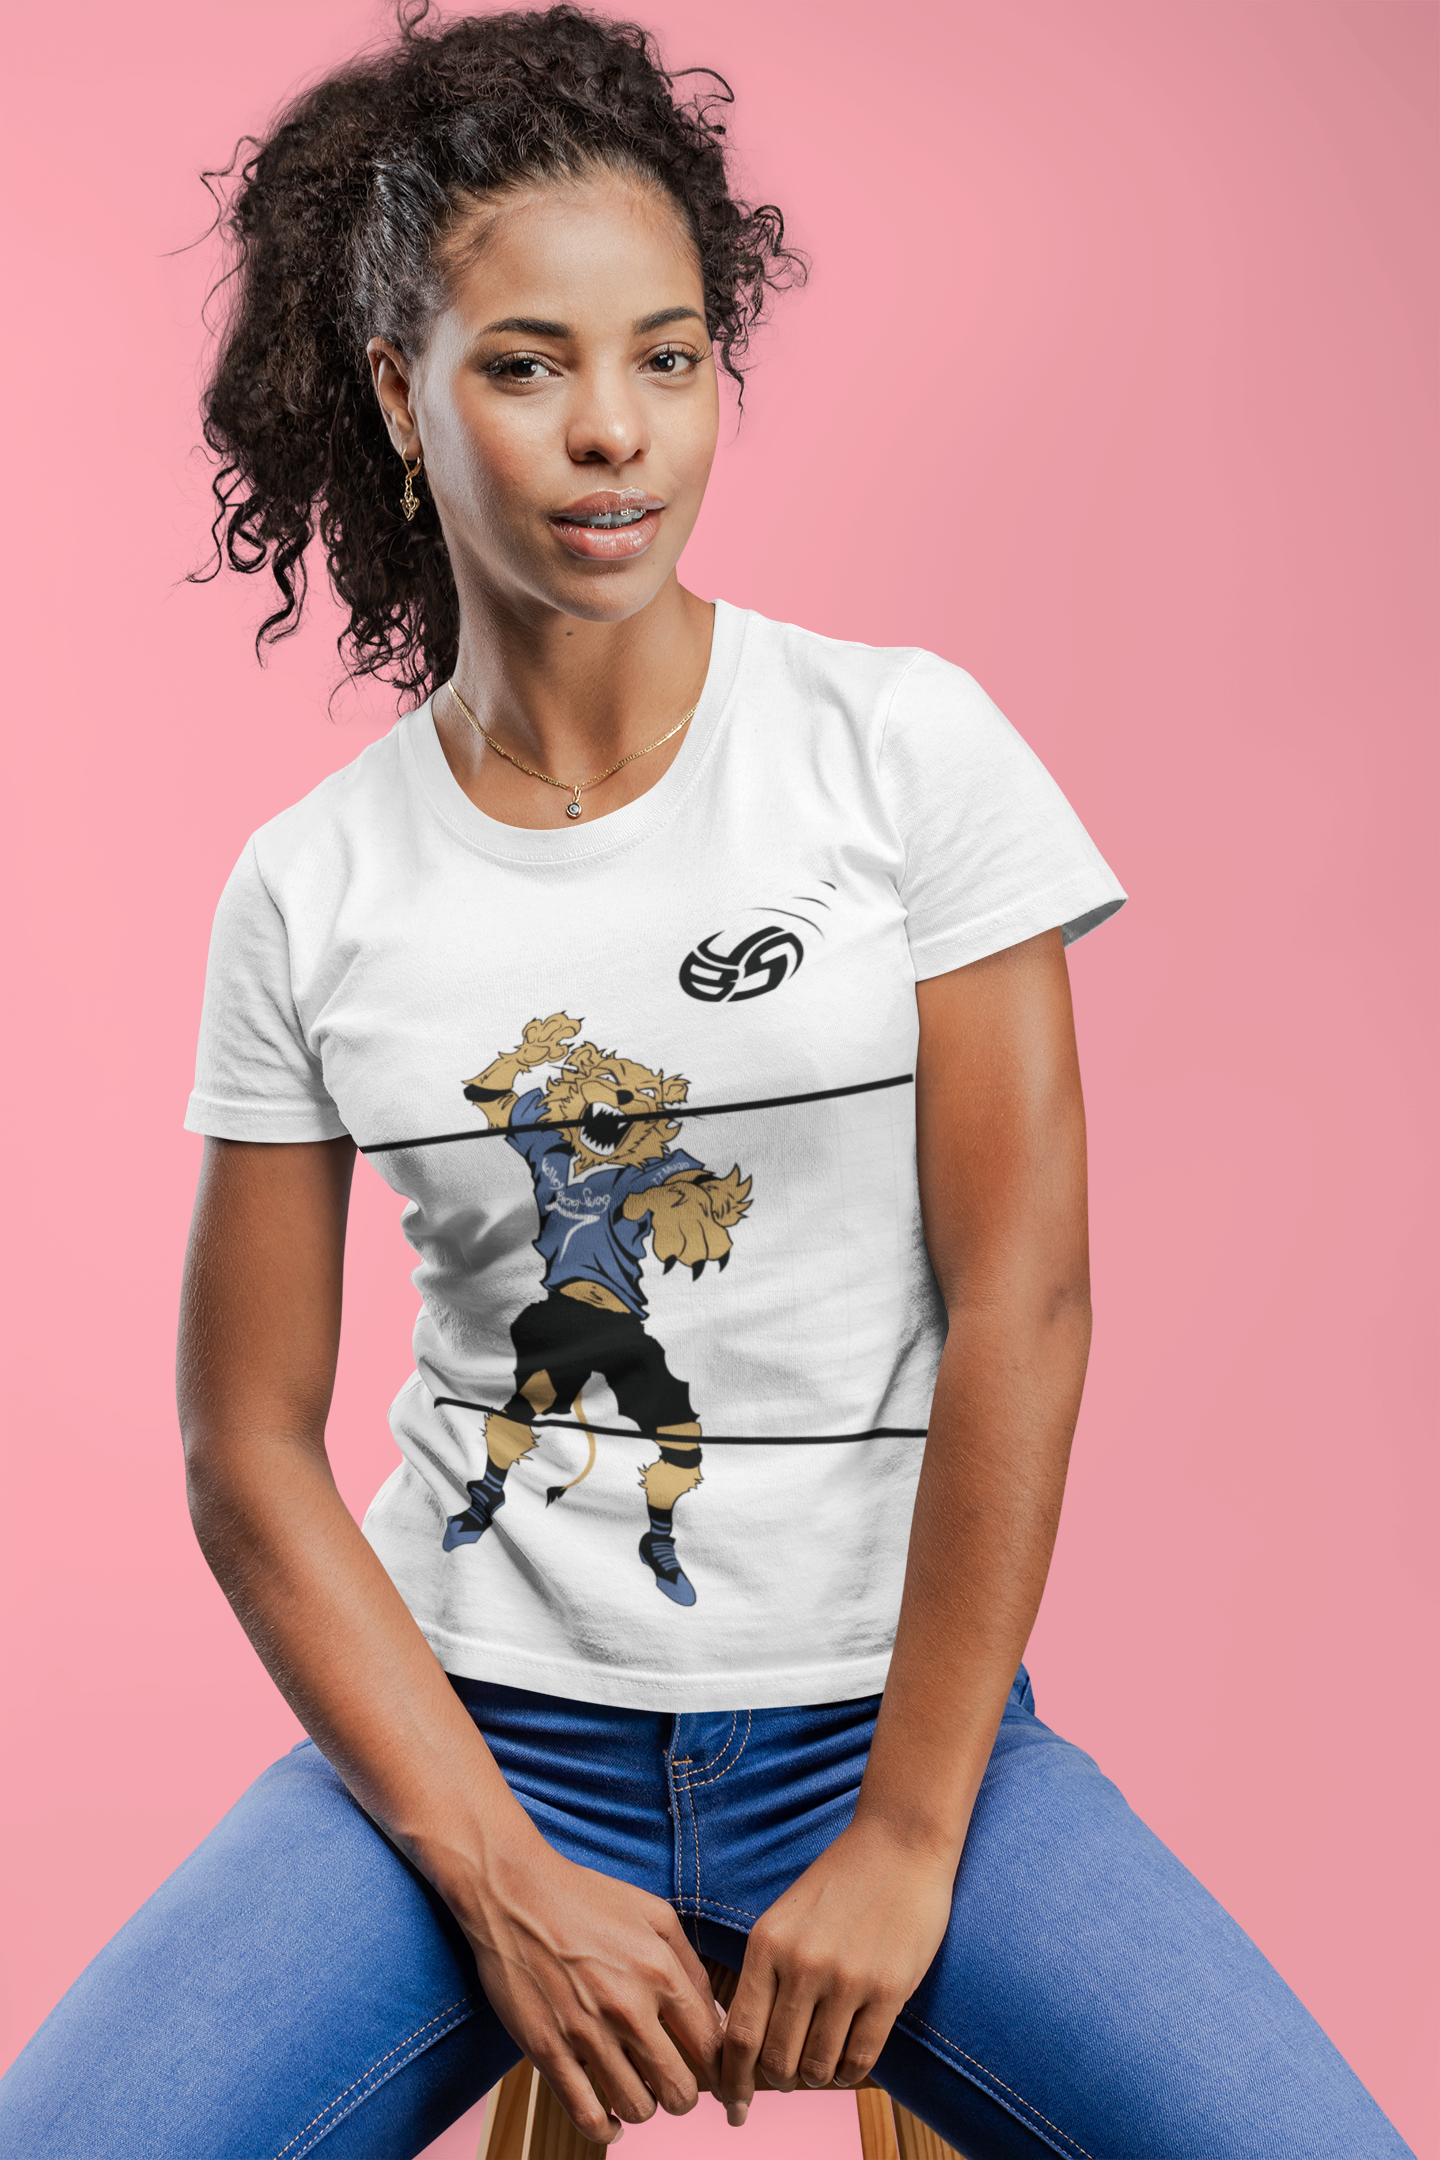 Shop your next Volleybragswag lion shirt now!